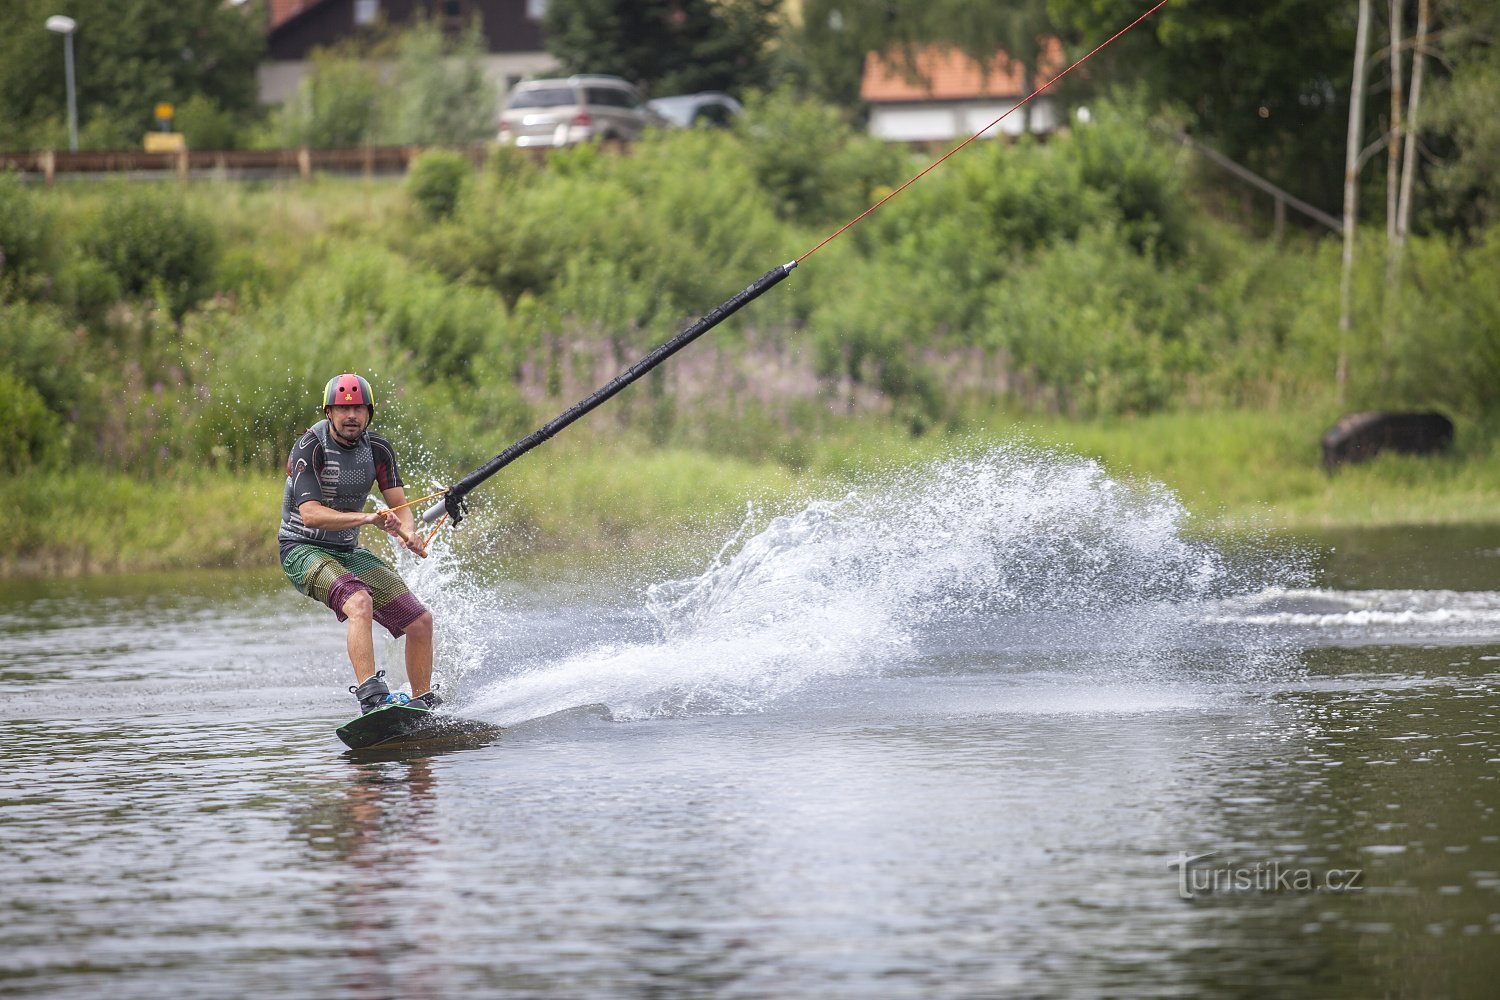 You can also try riding a water lift here - will wakeboarding be your favorite?